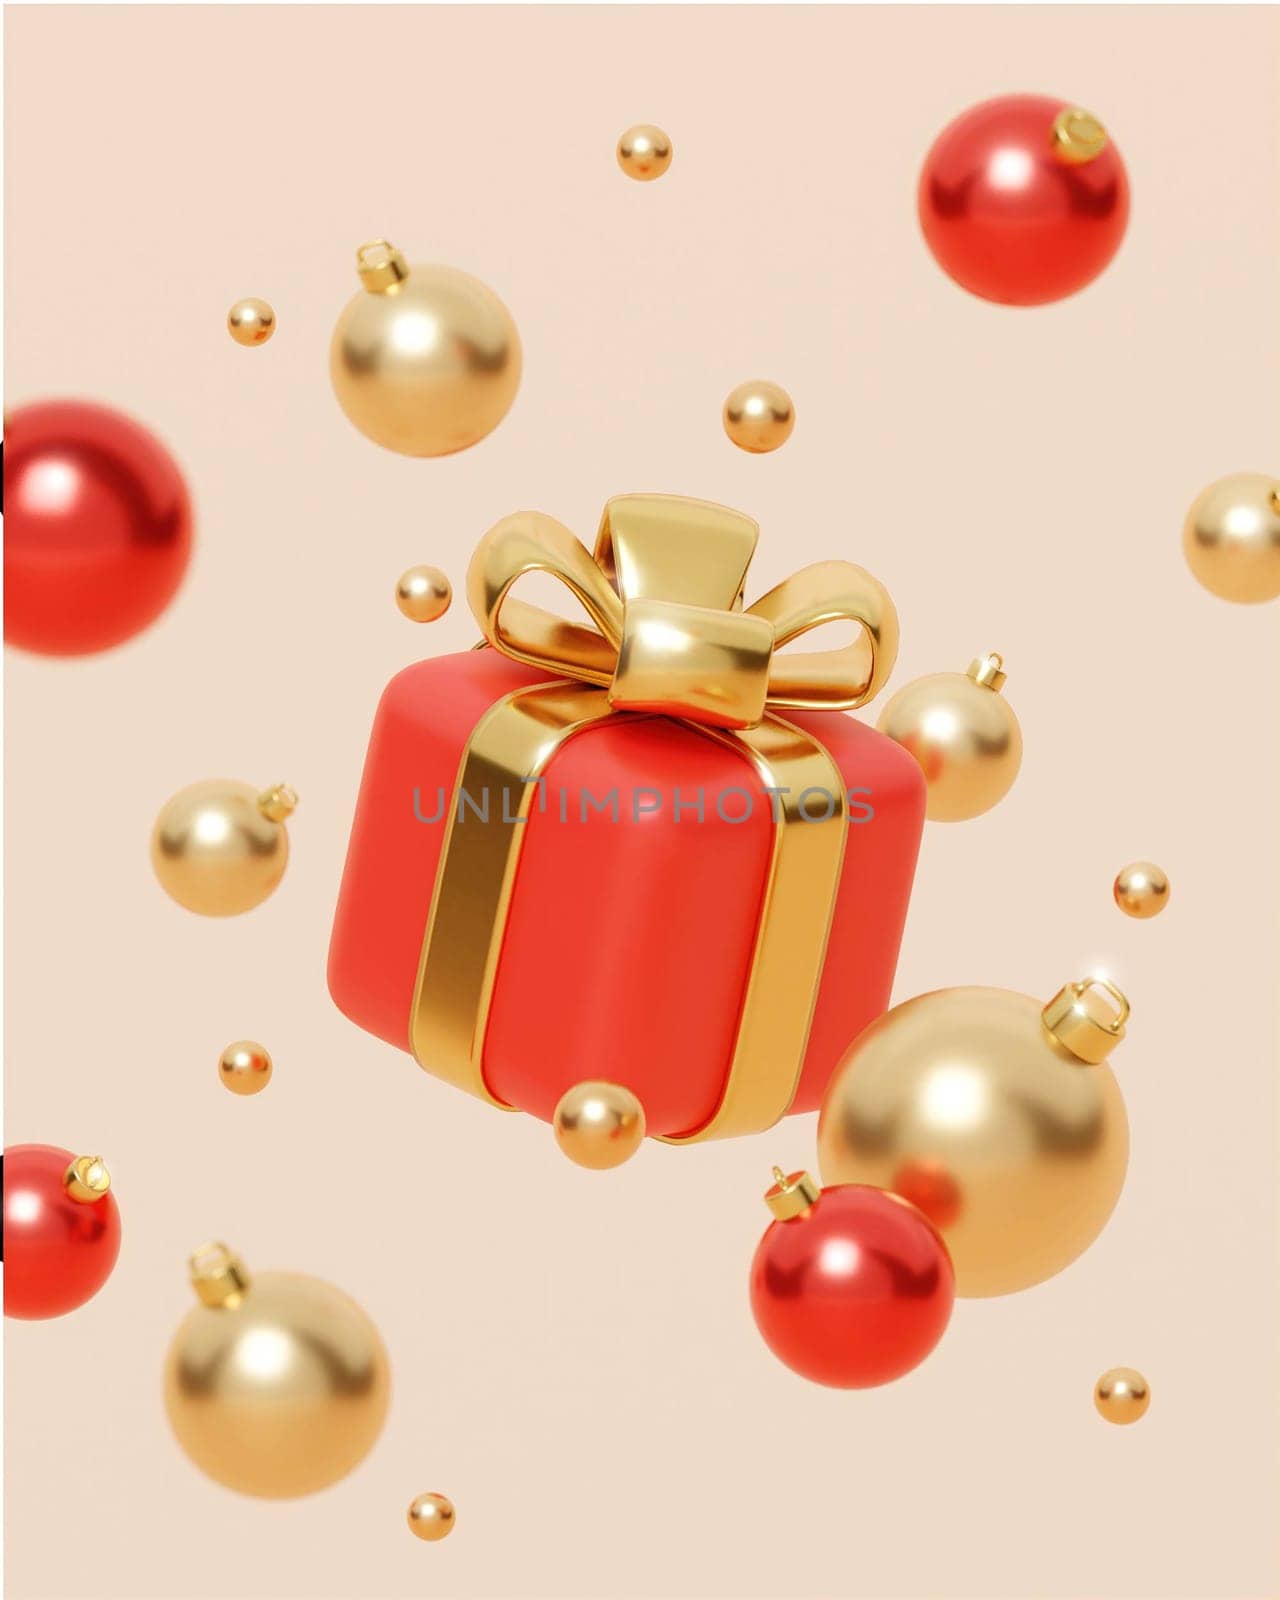 Merry Christmas and Happy New Year. Xmas Background design, gift box, white balls and glitter gold confetti. Christmas poster, holiday banner layout. 3d render by meepiangraphic